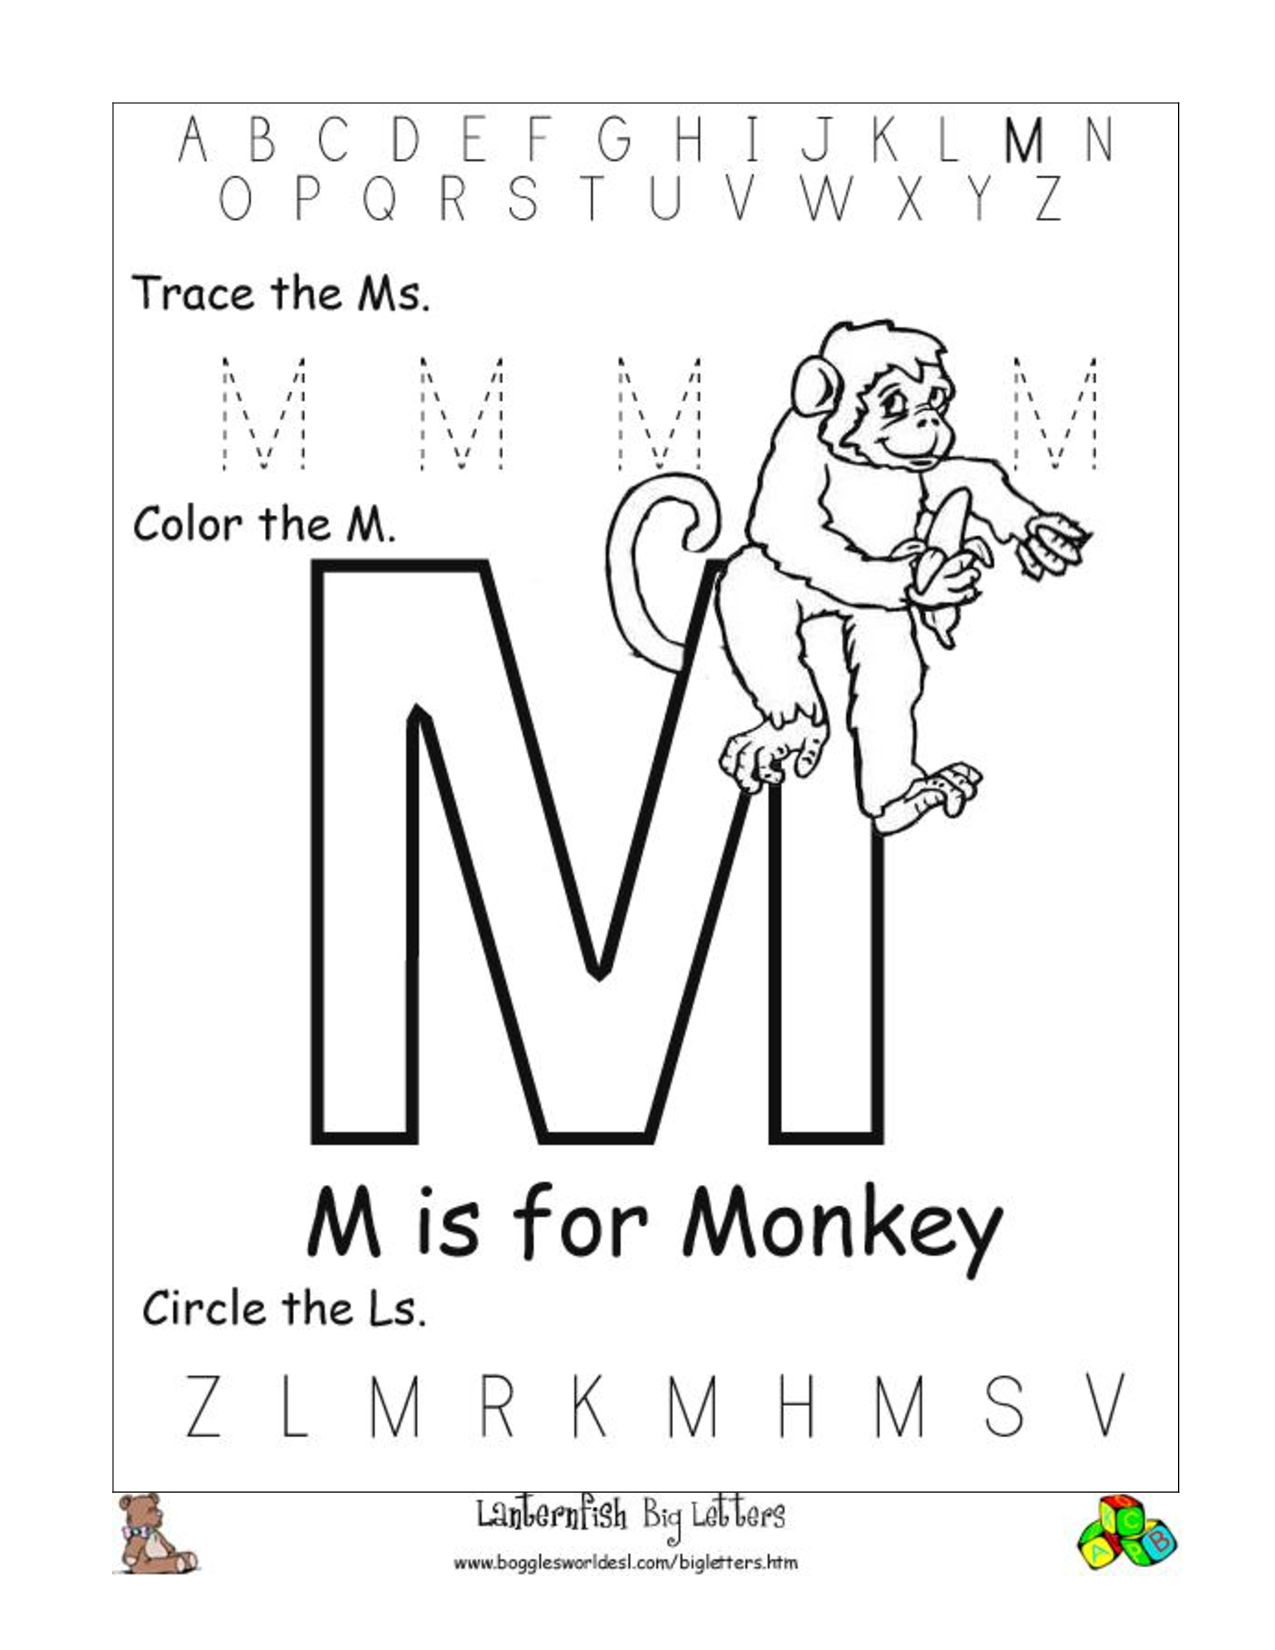 Letter M Worksheets Hd Wallpapers Download Free Letter M throughout Letter M Worksheets For Kindergarten Free